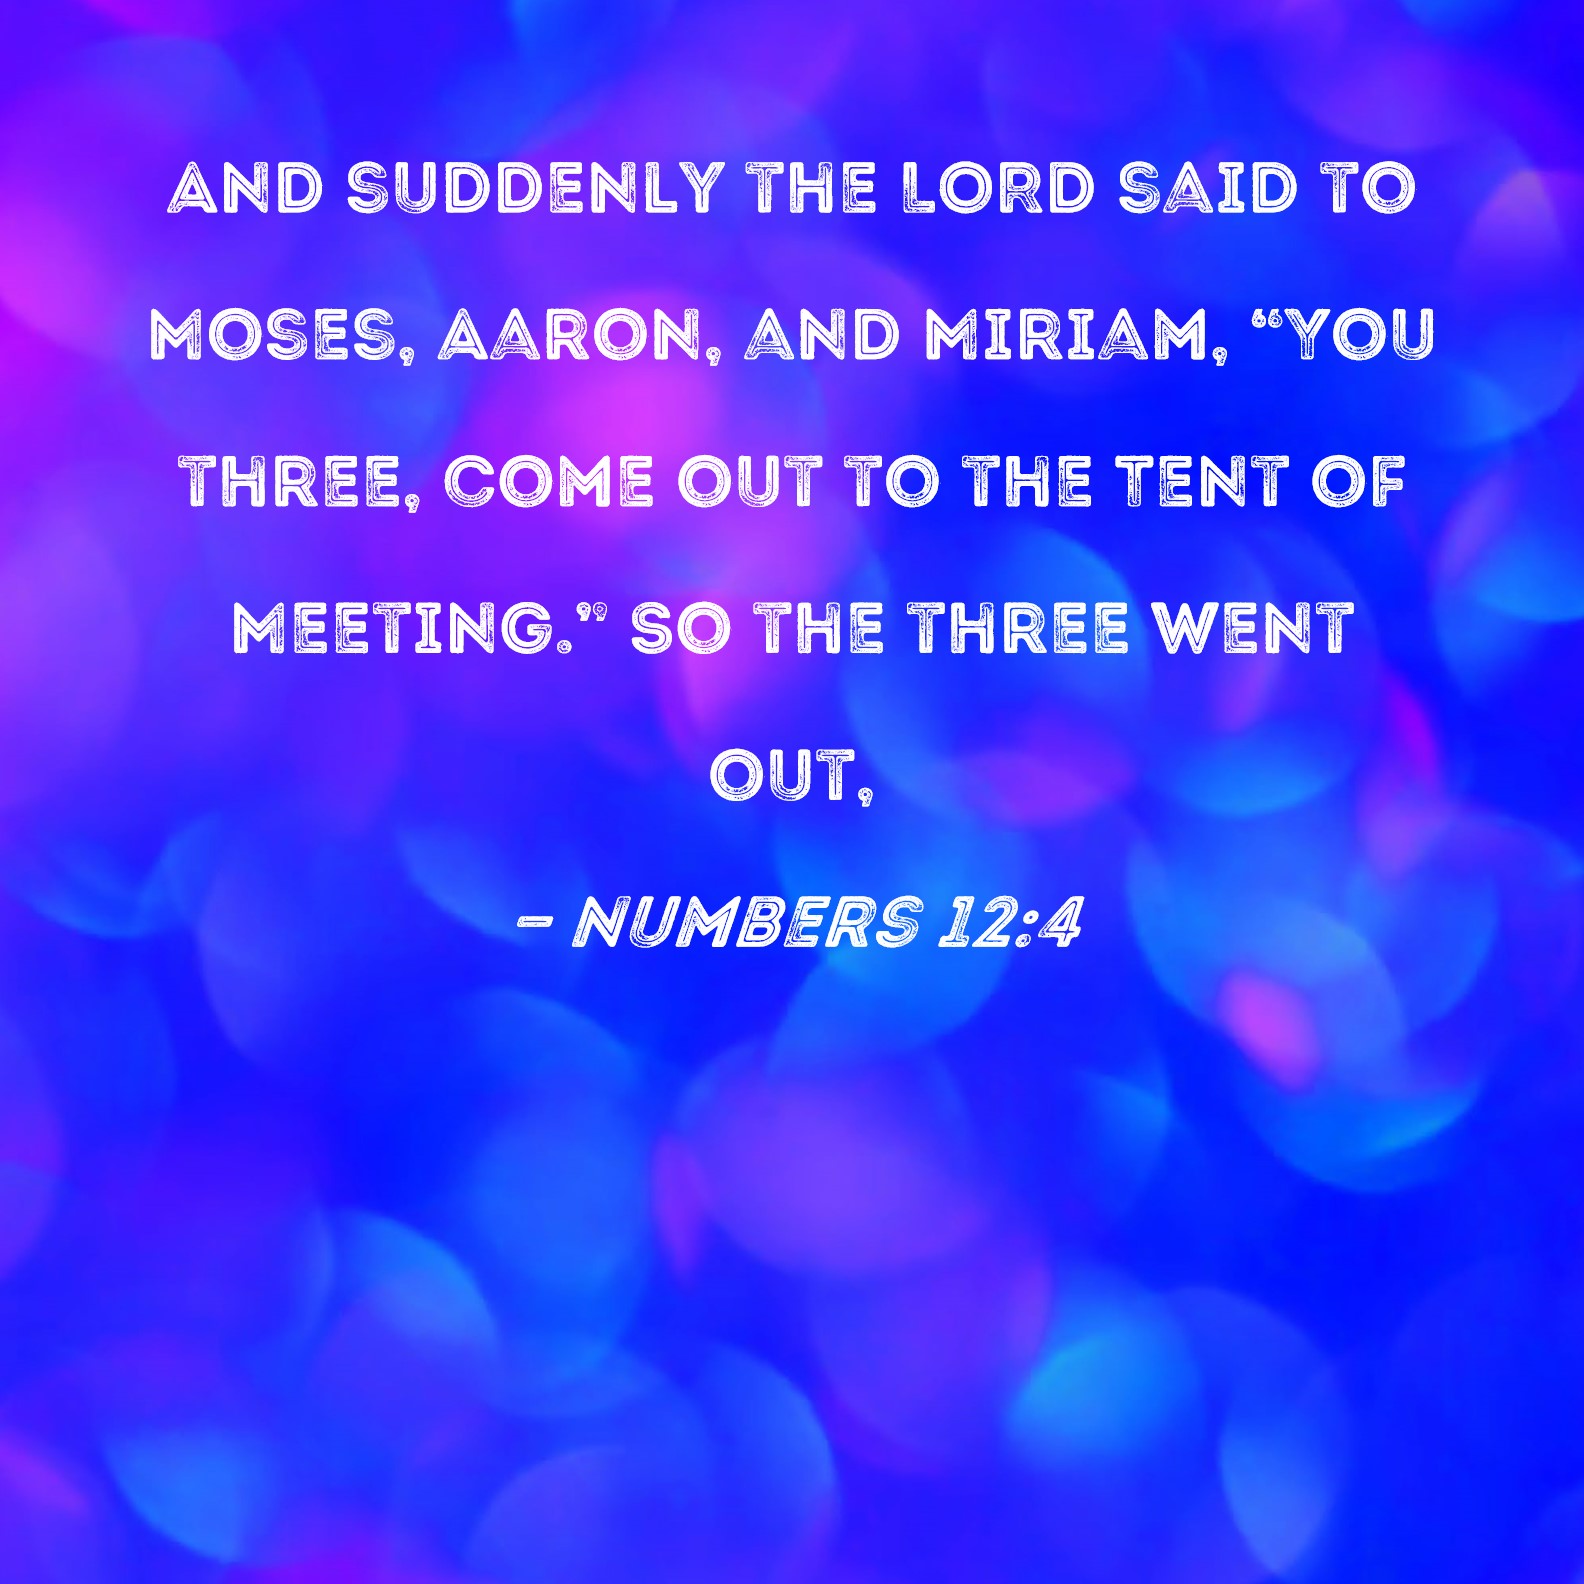 Numbers 12:4 And suddenly the LORD said to Moses, Aaron, and Miriam ...